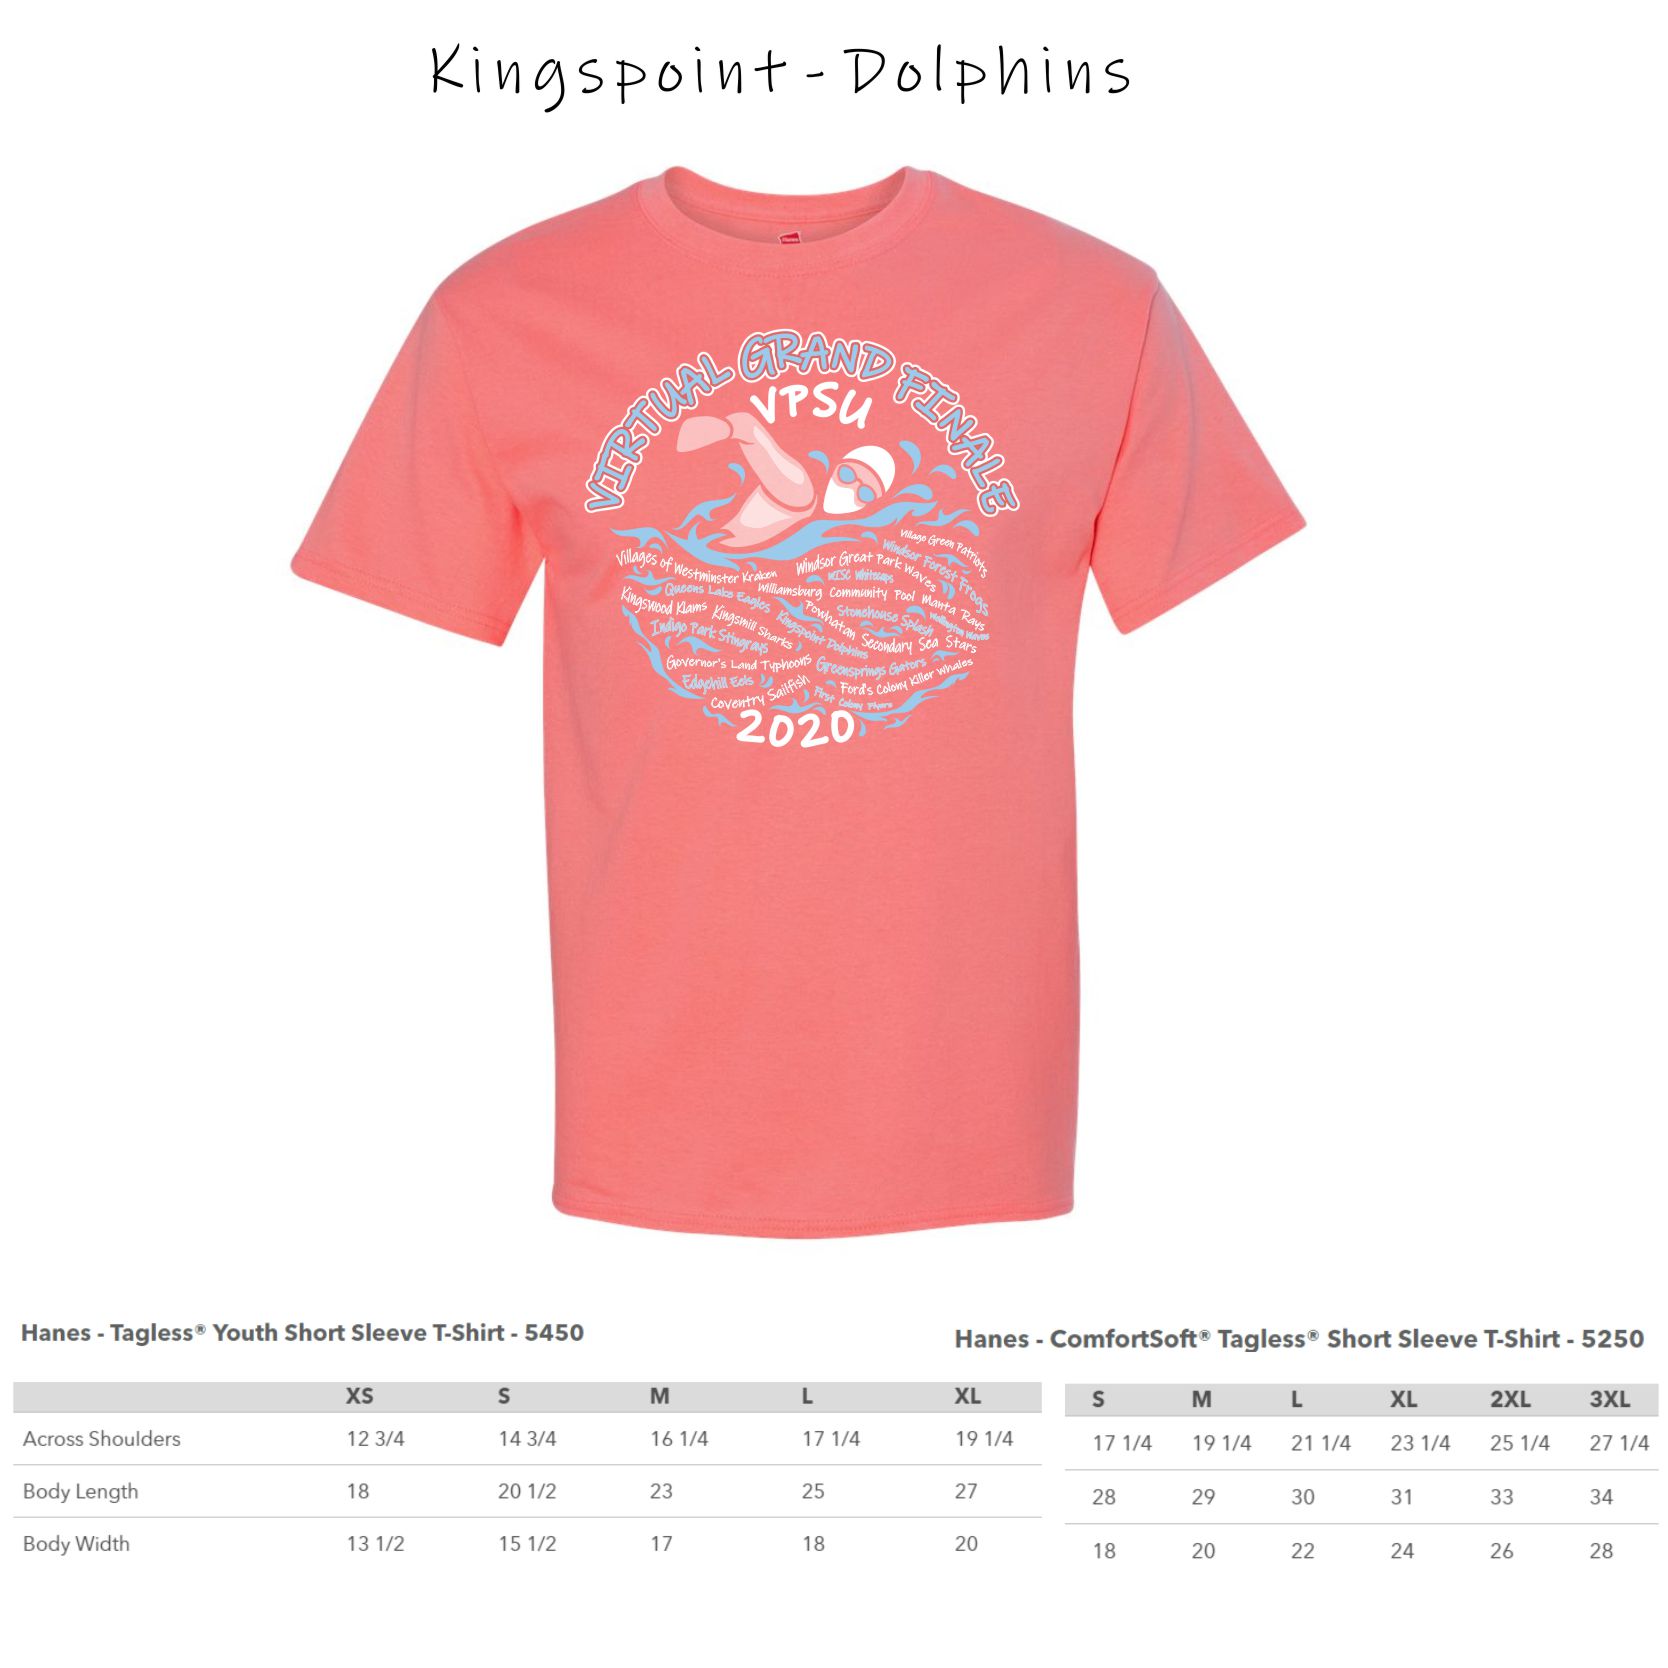 1 - Kingspoint Dolphins